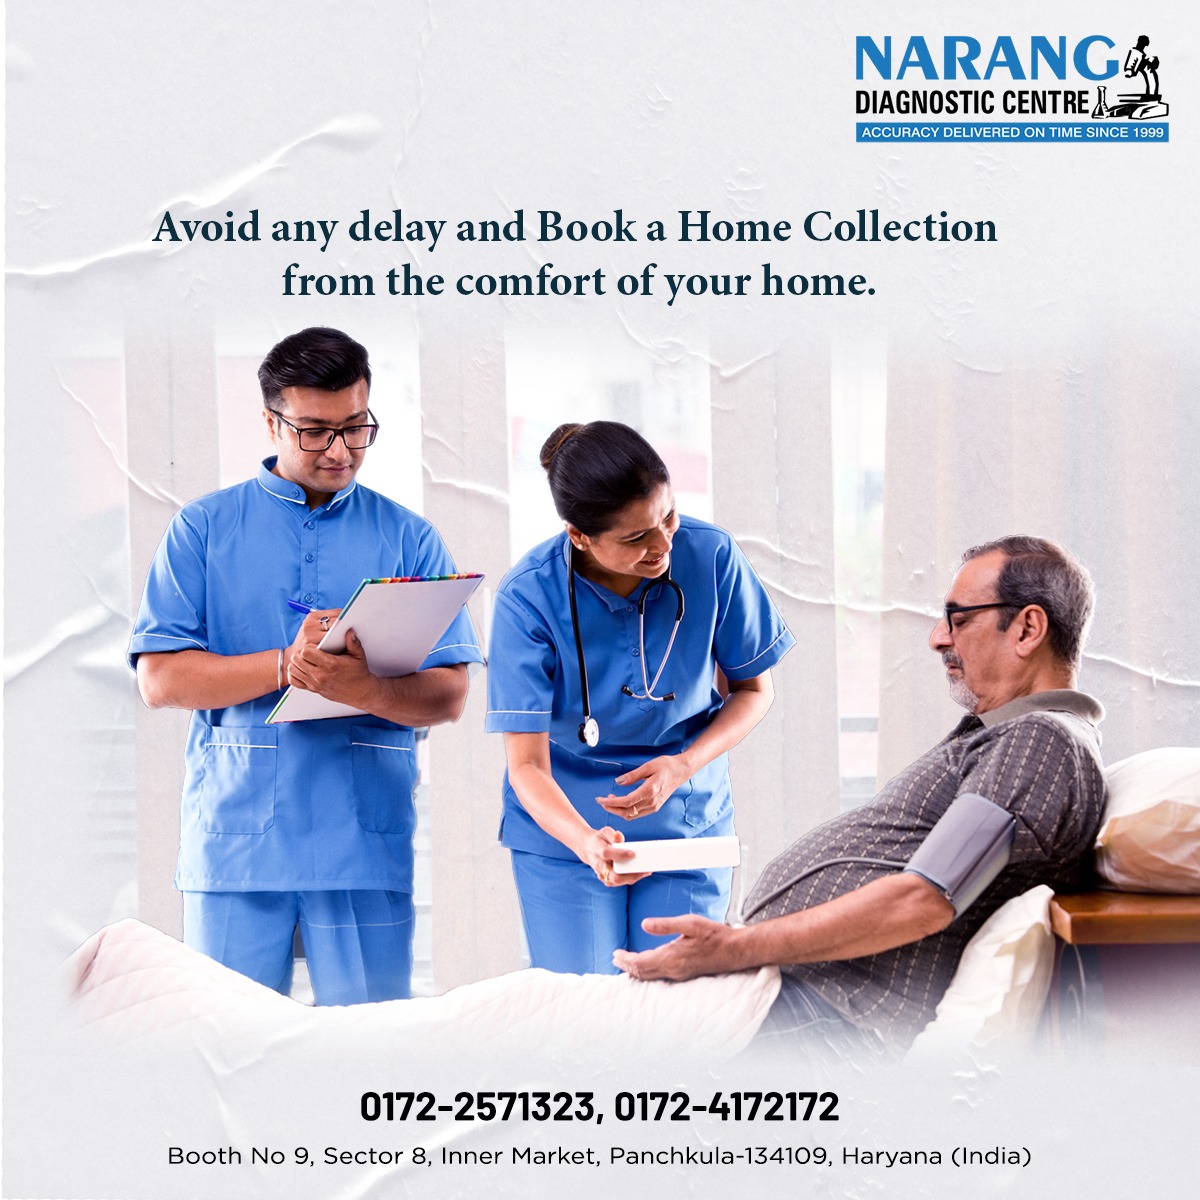 Avoid any delay and Book a 𝐇𝐨𝐦𝐞 𝐜𝐨𝐥𝐥𝐞𝐜𝐭𝐢𝐨𝐧 from the comfort of your home. 

Book Your Test Now!-- 0172-2571323 or 0172-4172172 

#Homecollection #Diagnosticcentre #Trusteddiagnosticcentre #Wholebodycheckup #narangdiagnosticcentre #Healthpackage #HealthCheckup